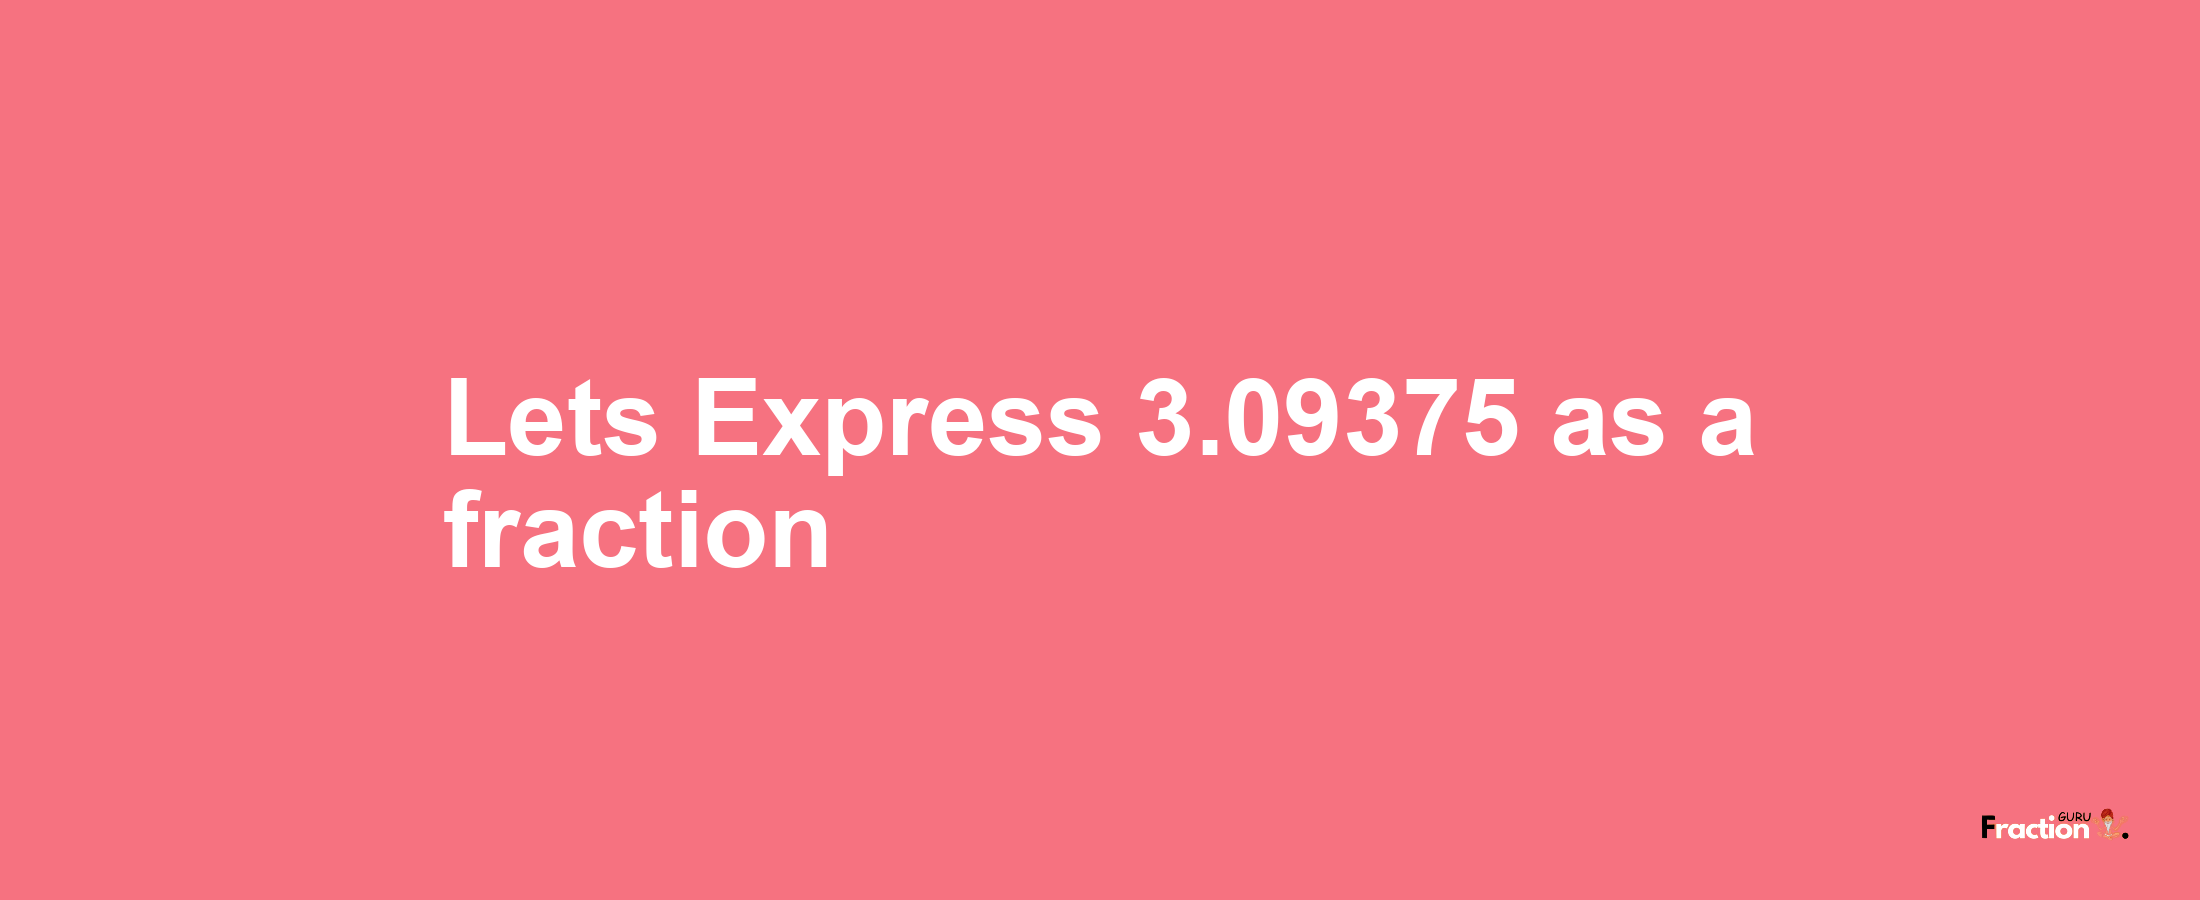 Lets Express 3.09375 as afraction